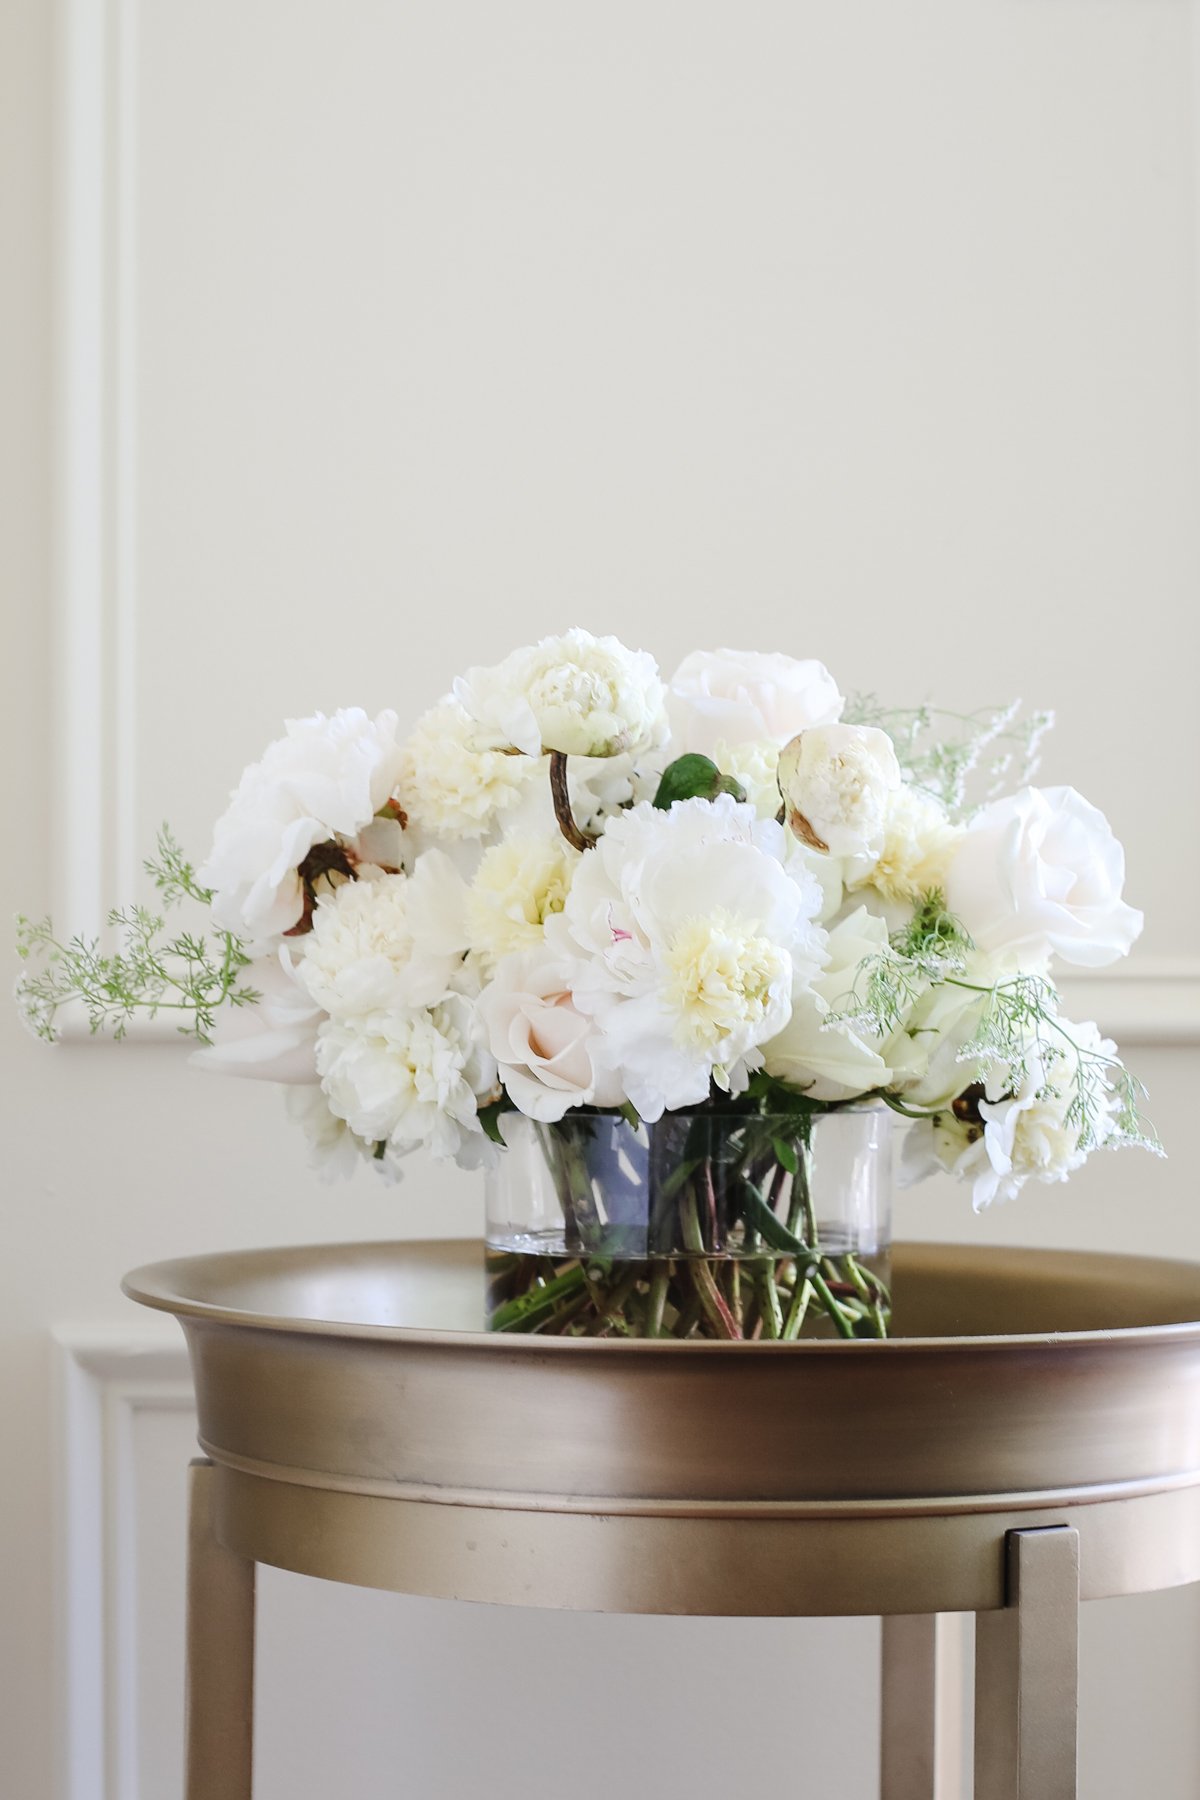 A white peony arrangement in a glass vase.